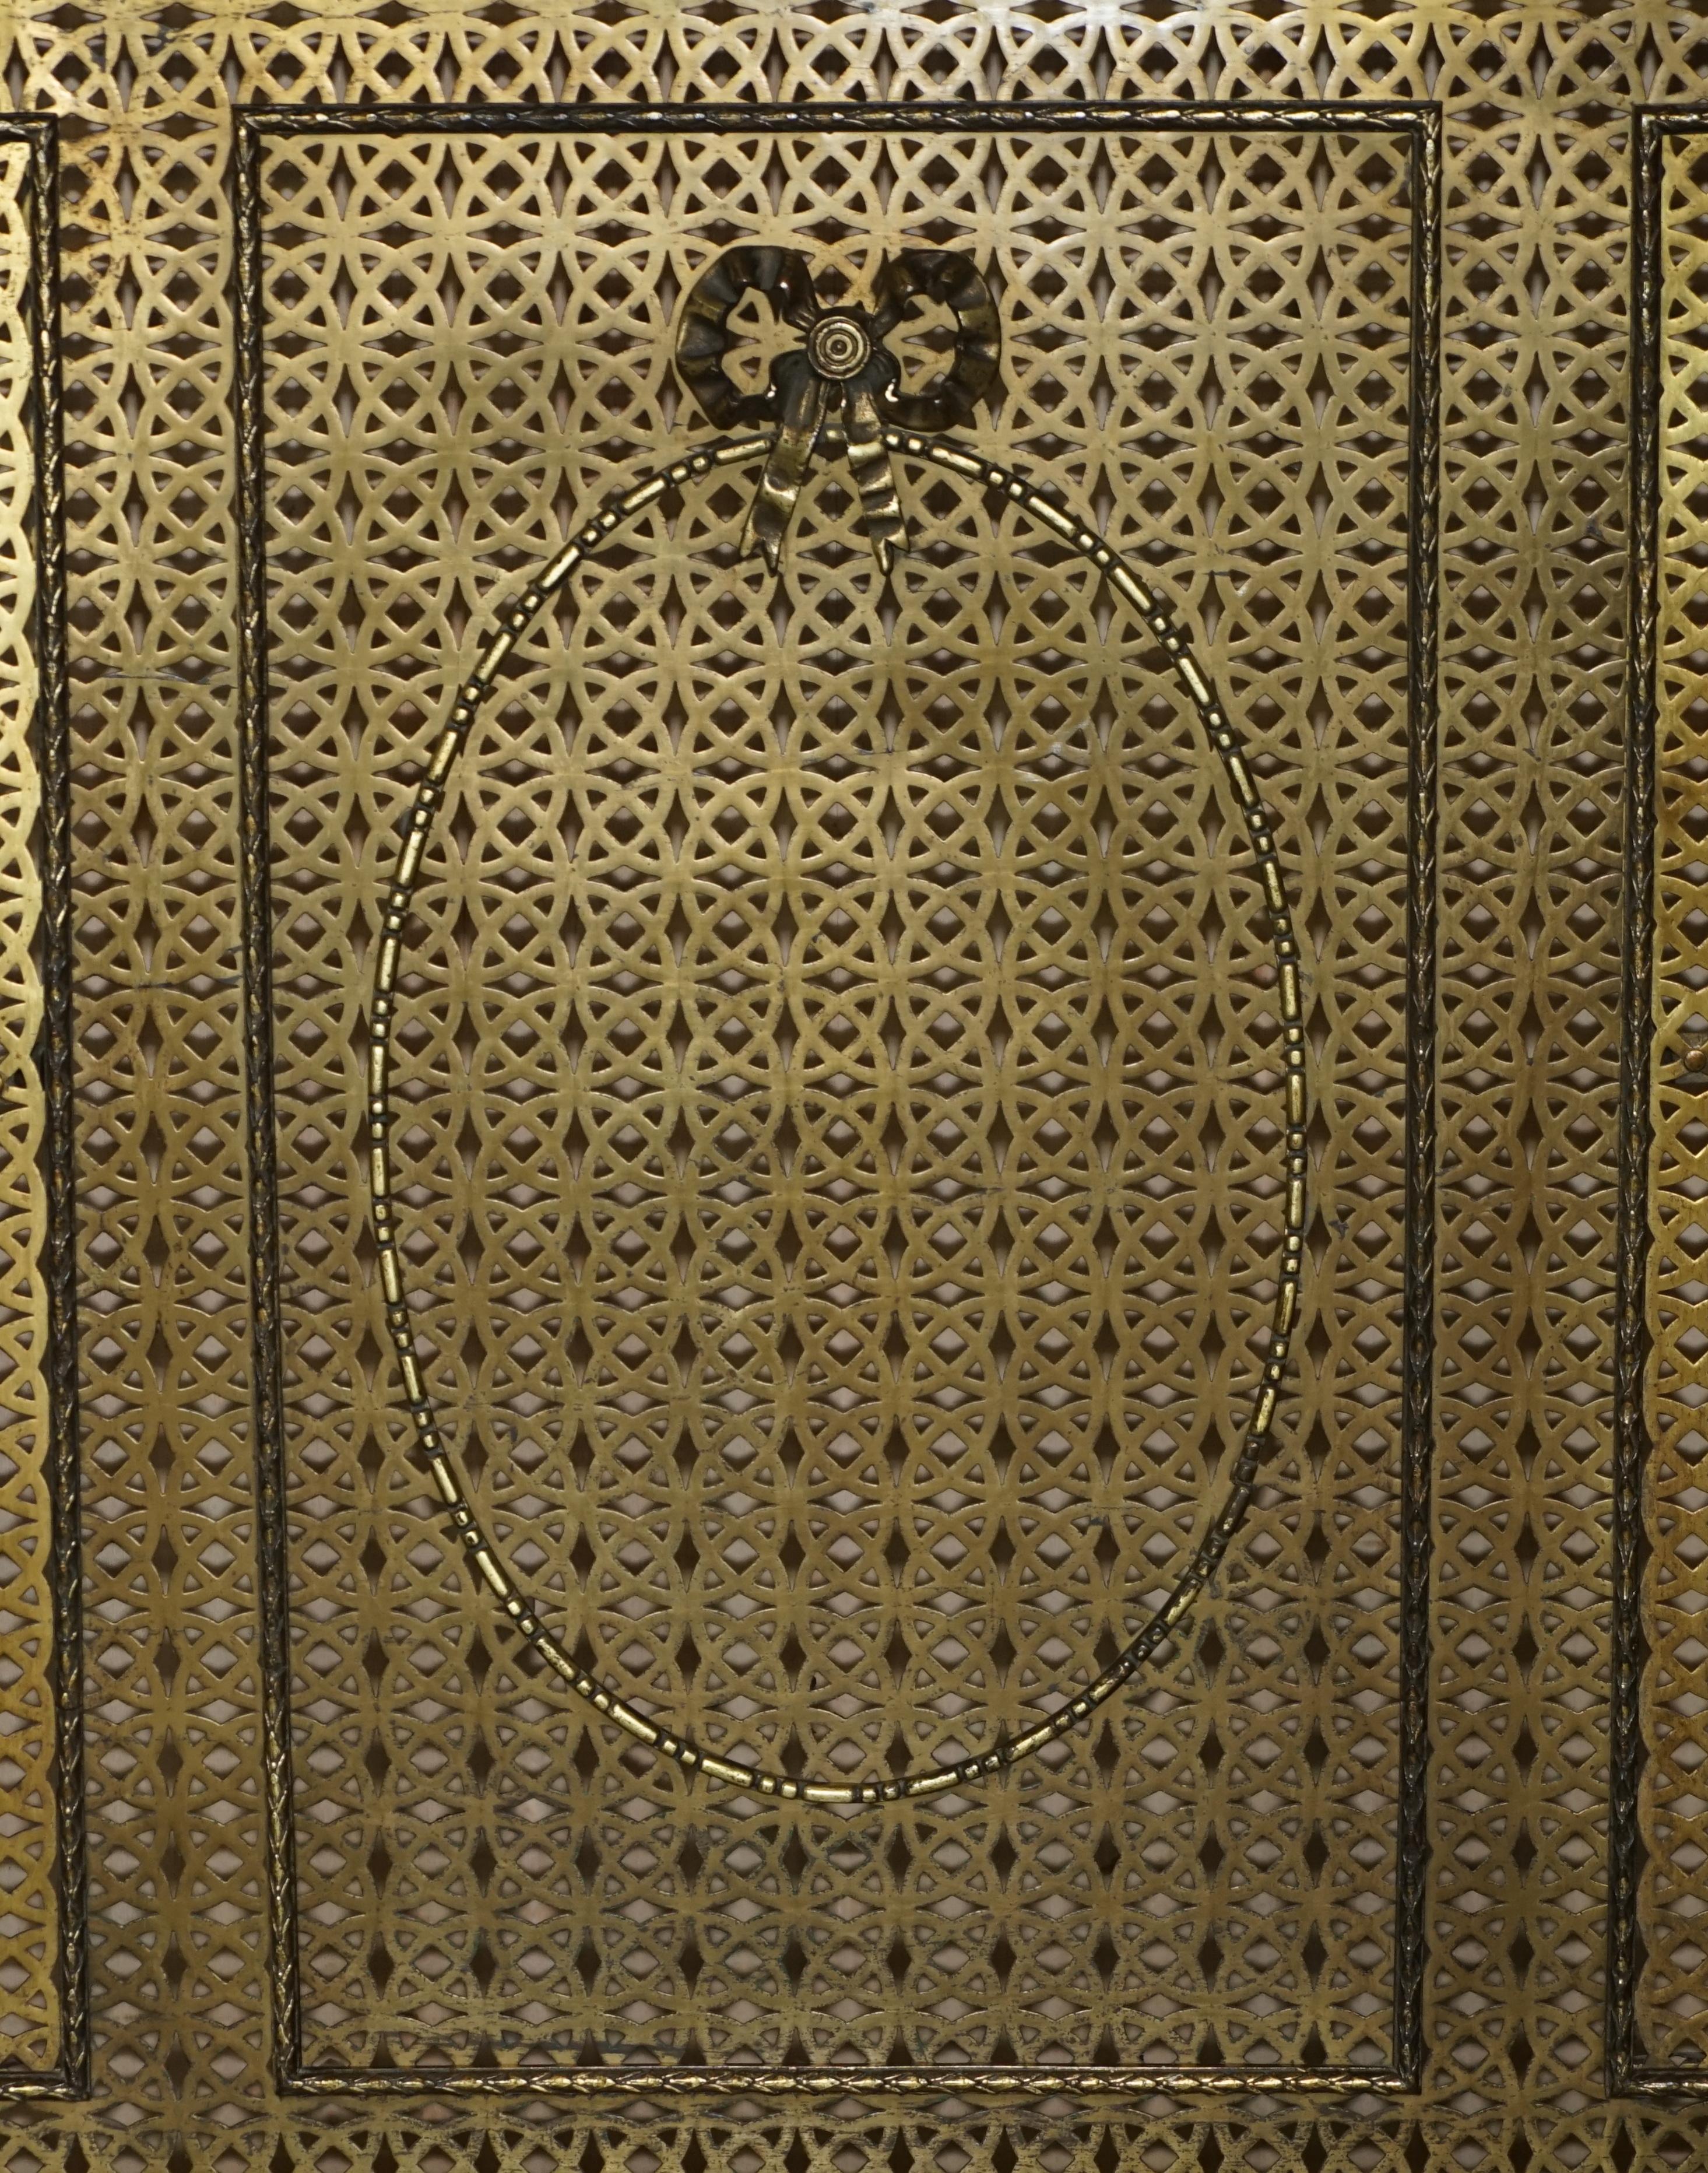 Antique circa 1920 Art Deco French Brass Pierced Sheet Radiator Cover with Doors 4